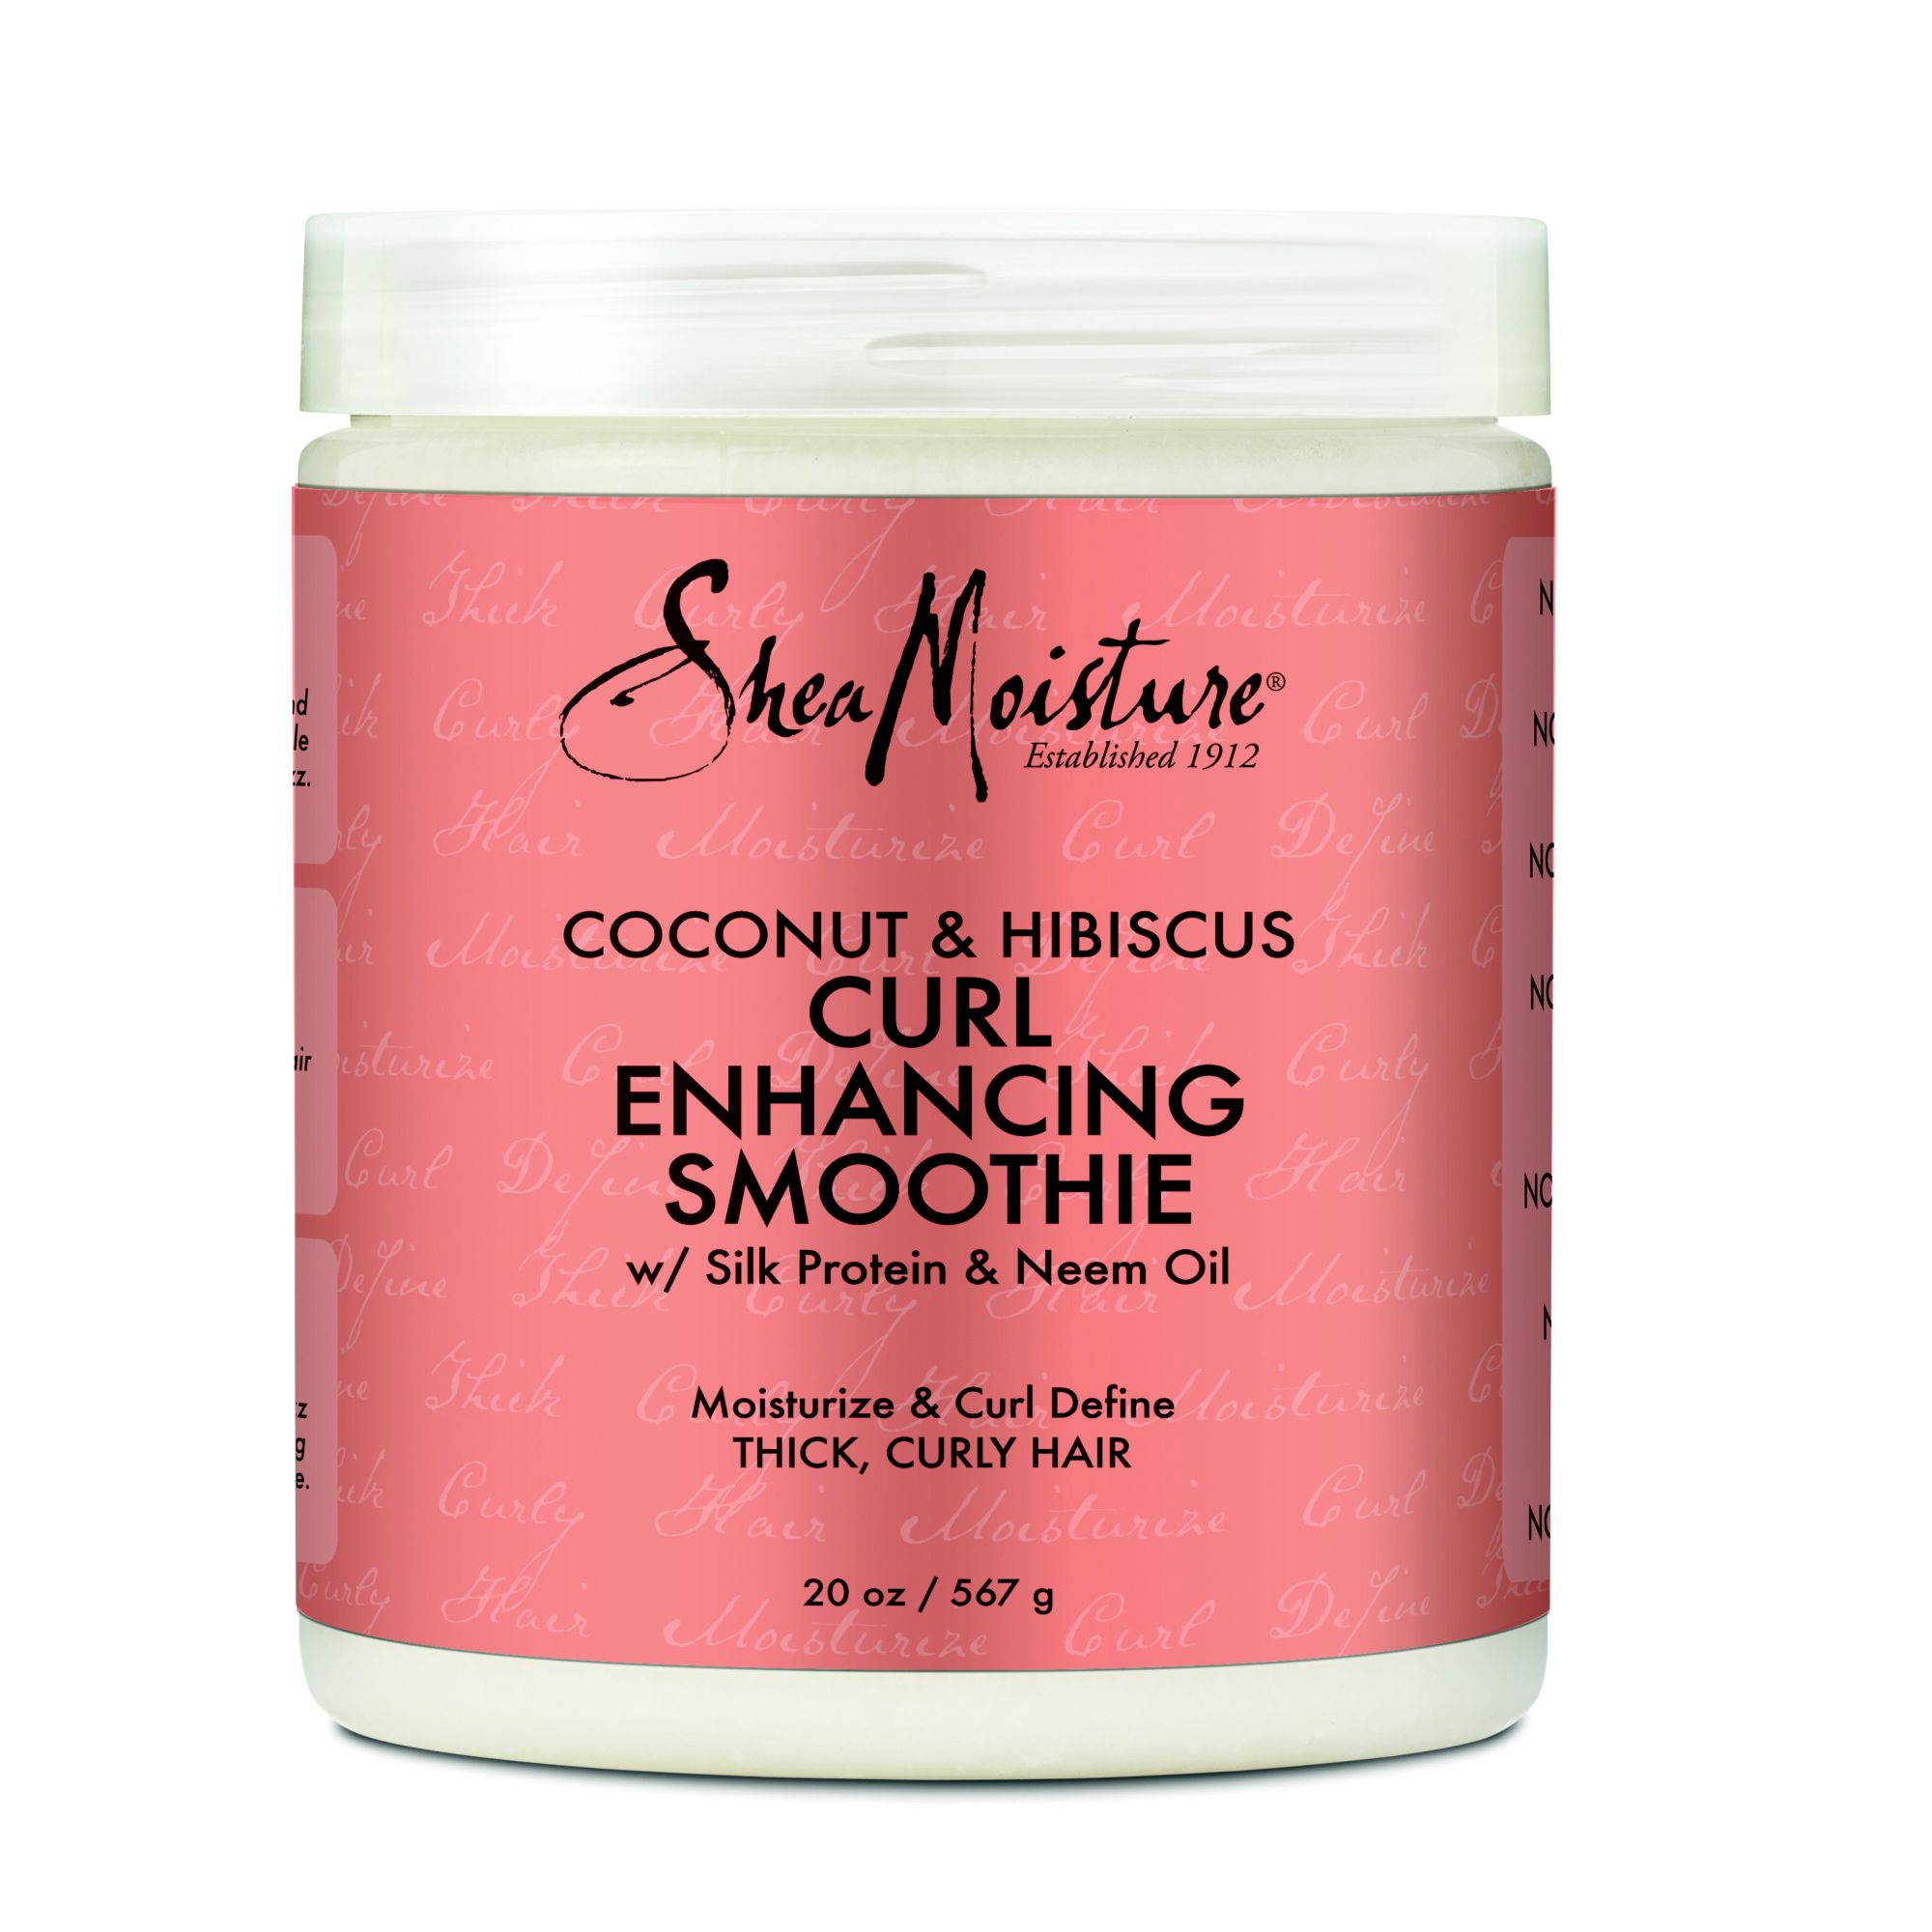 SheaMoisture Coconut and Hibiscus Curl Enhancing Smoothie, 20 oz.